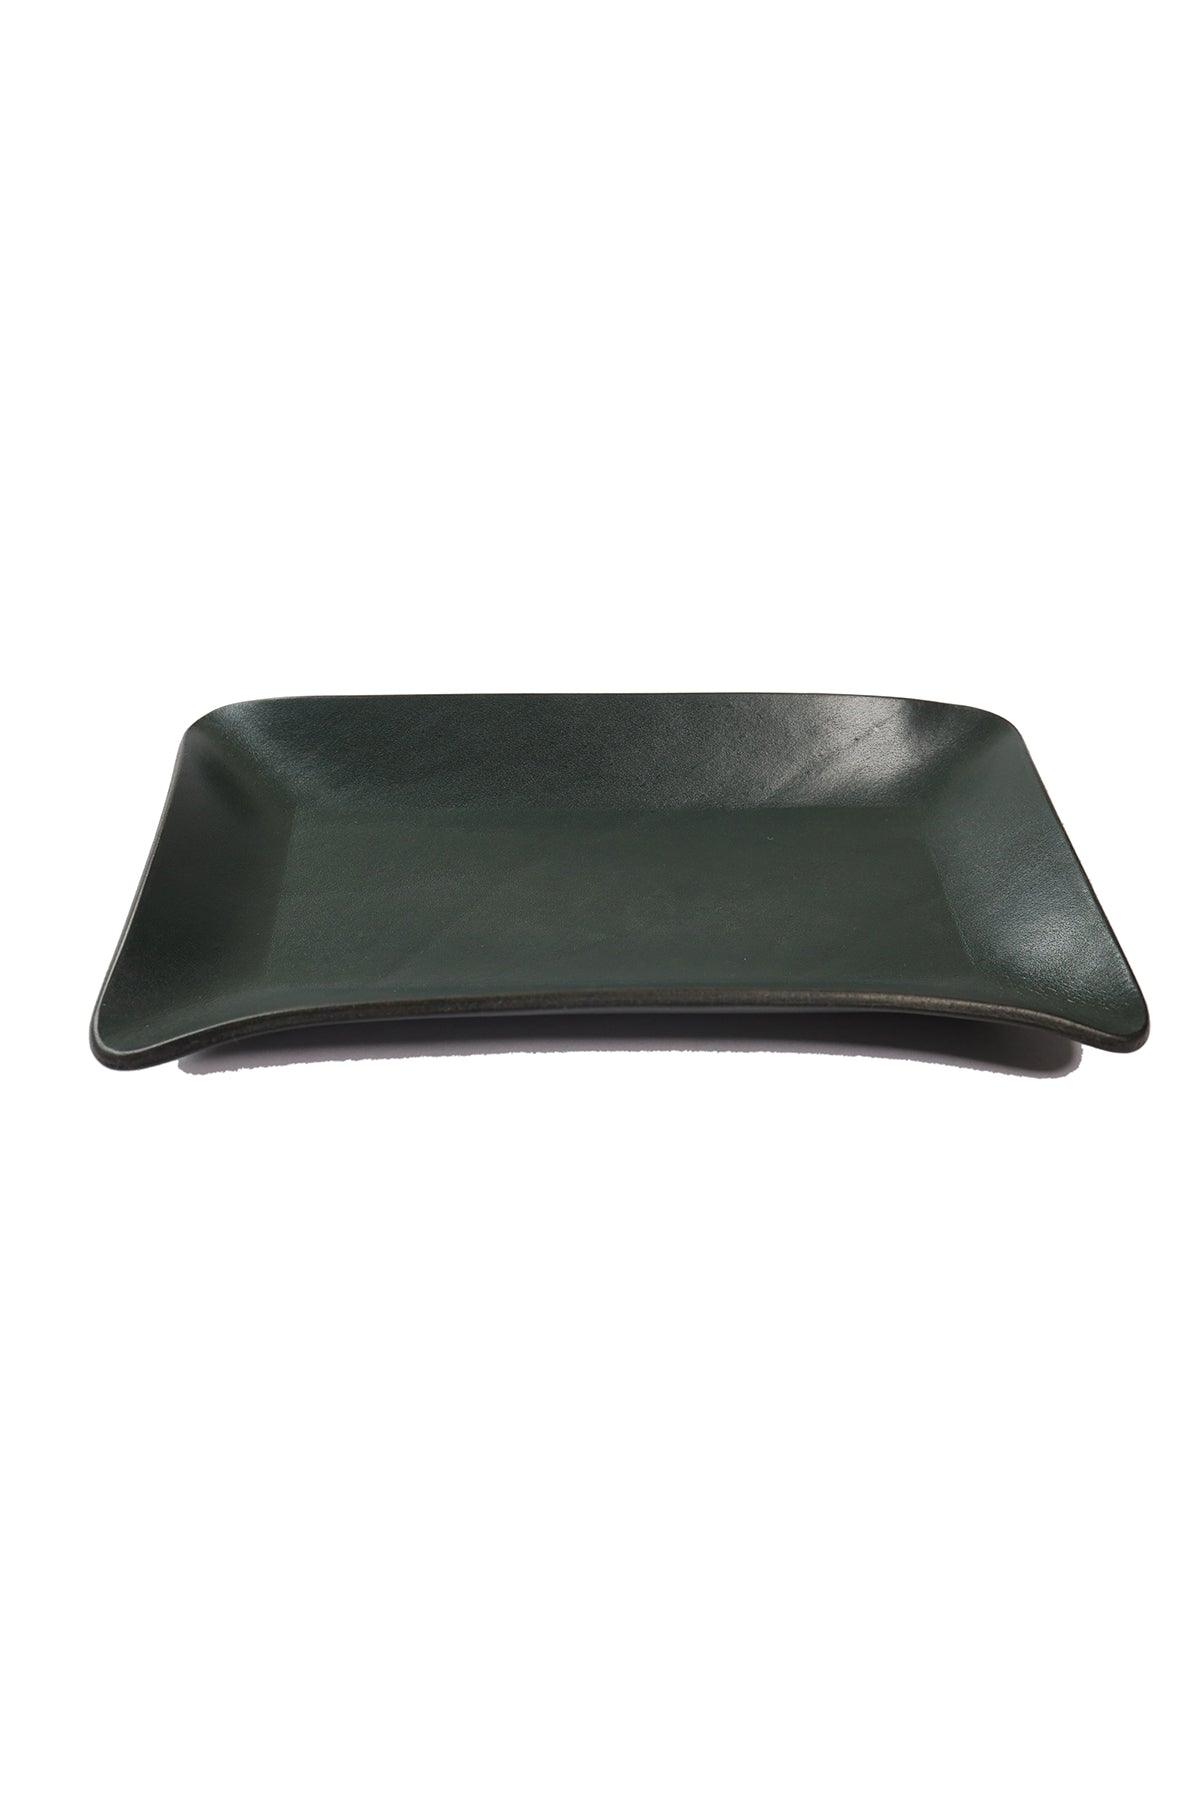 Classic Tray - Olive